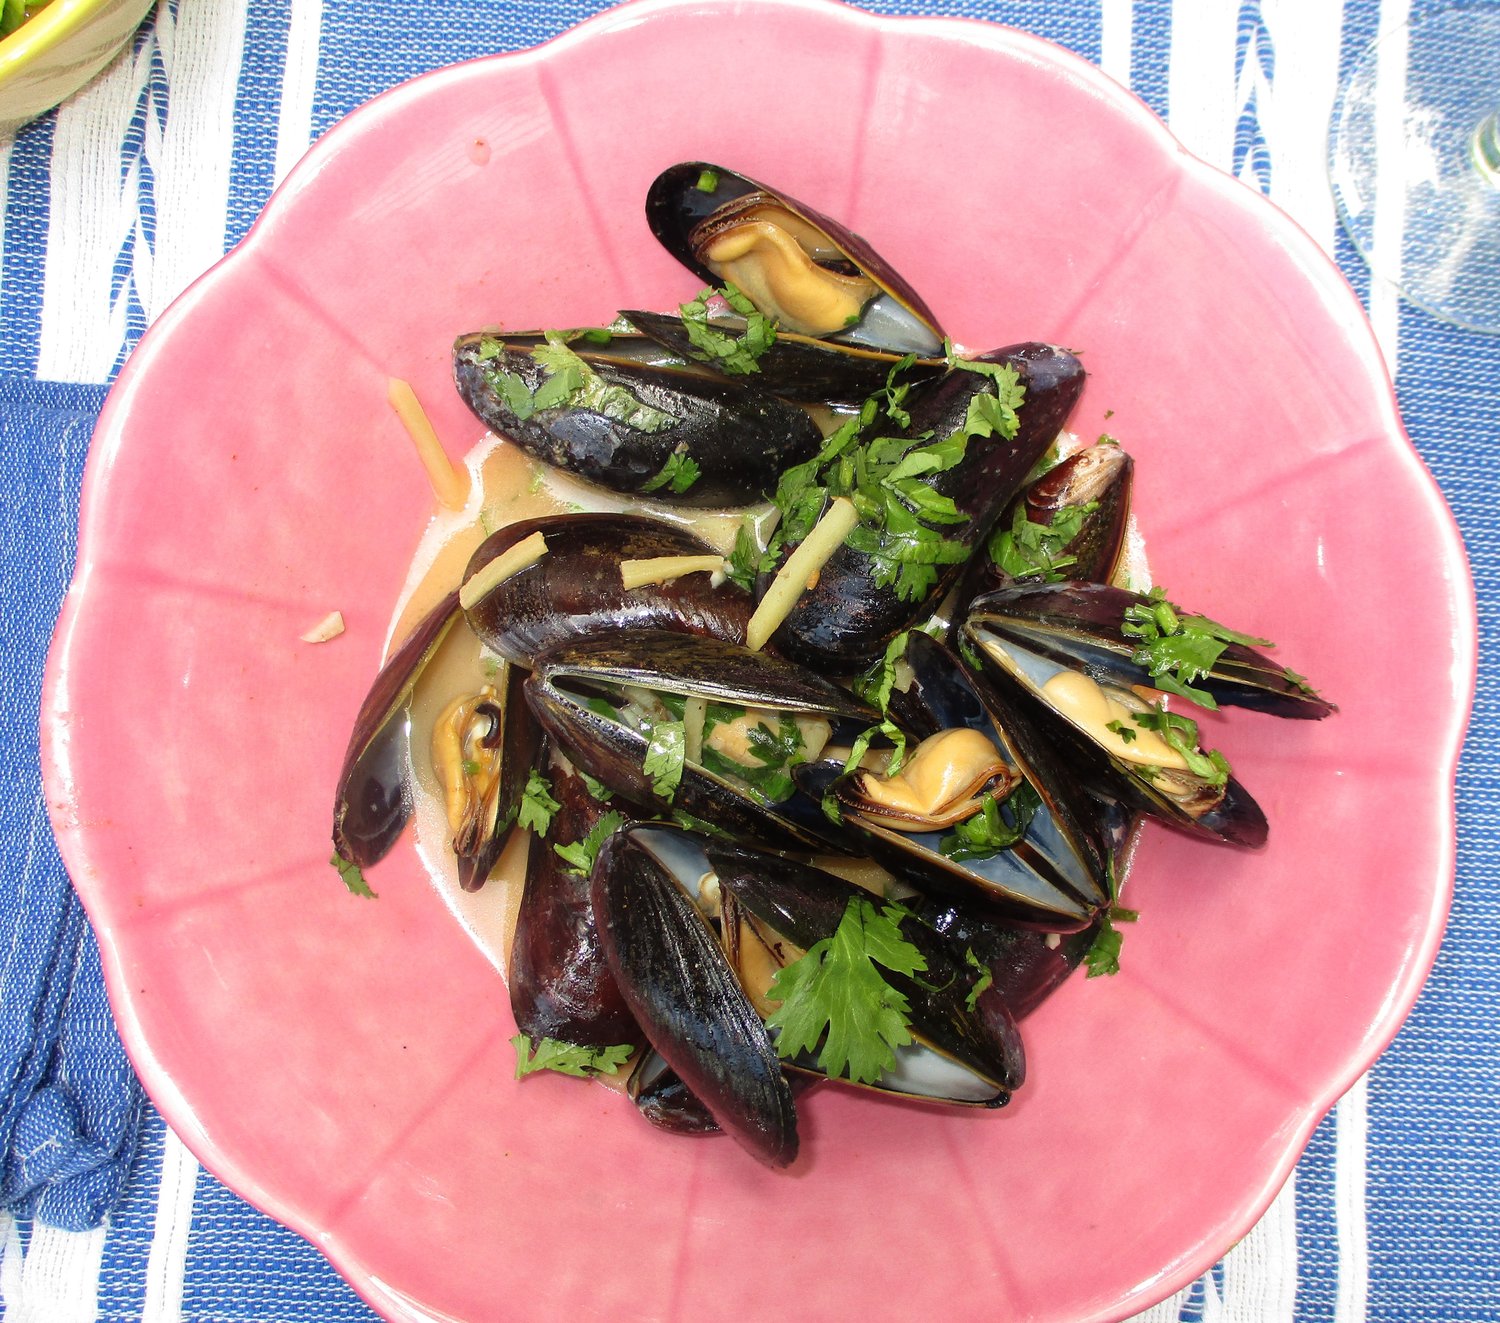 Mussels in Thai coconut sauce with ginger.